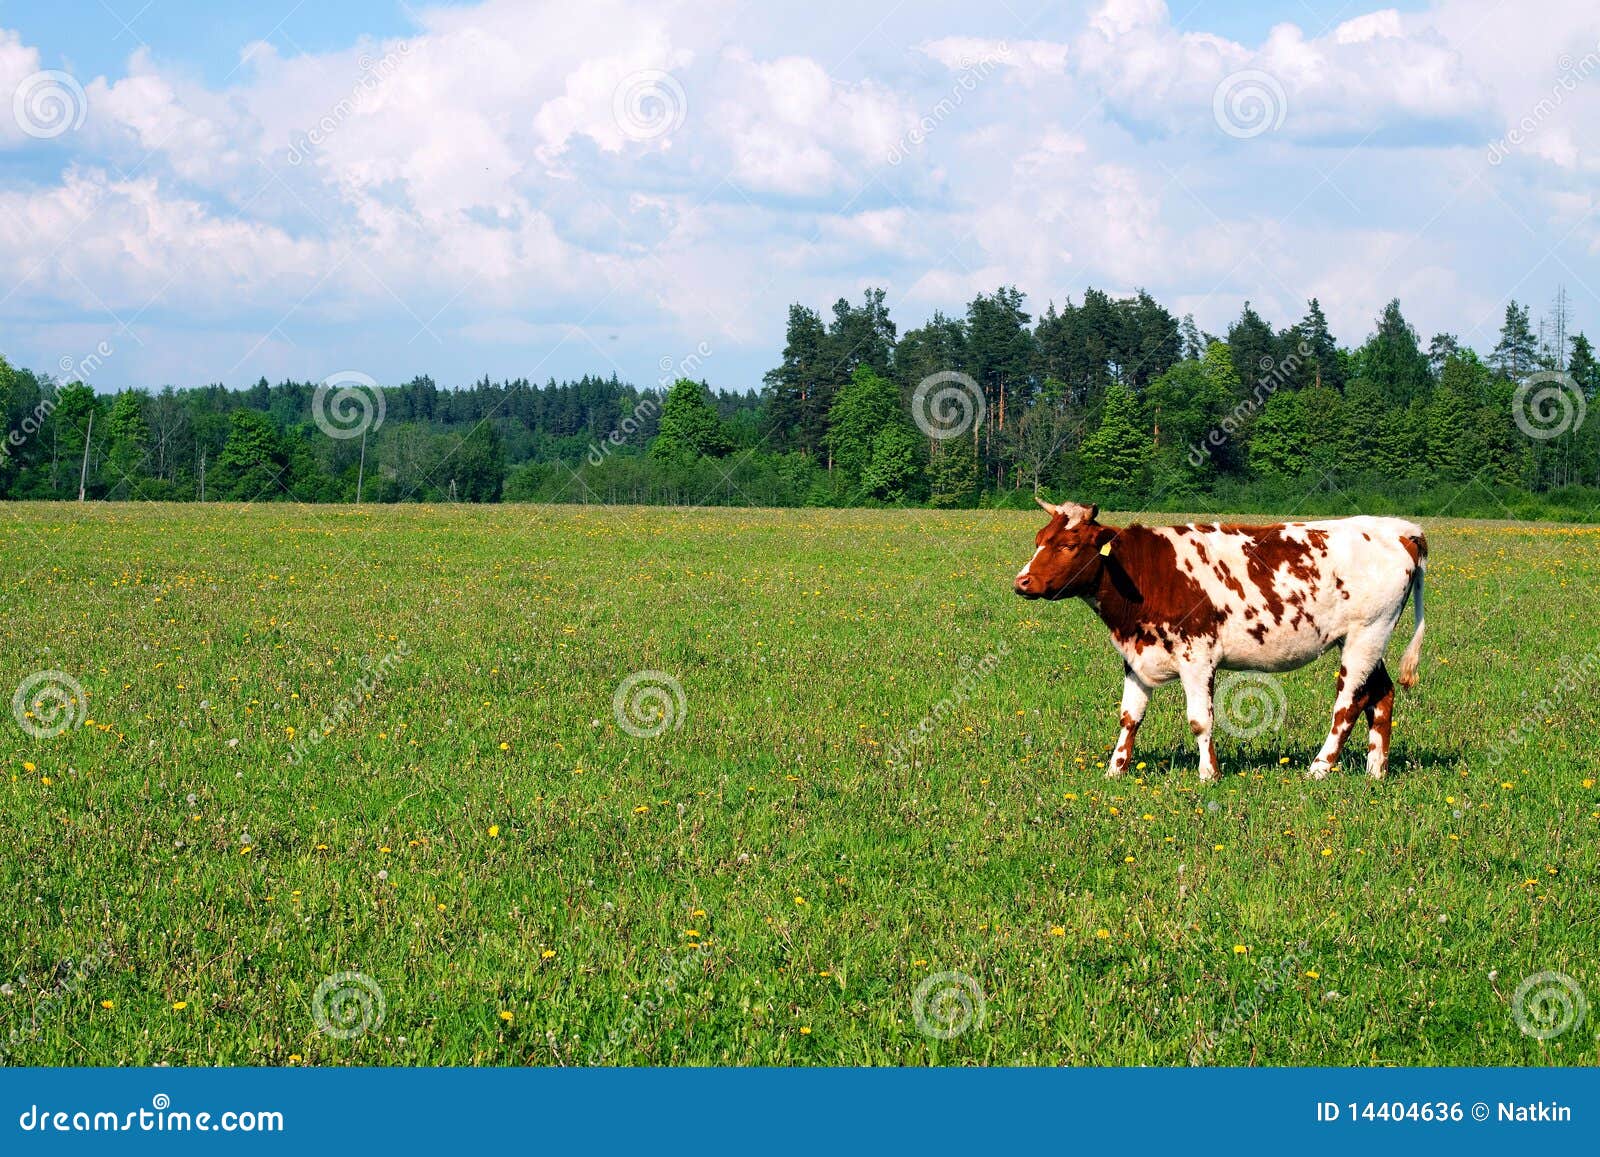 cow on the field, bovine on the skyline